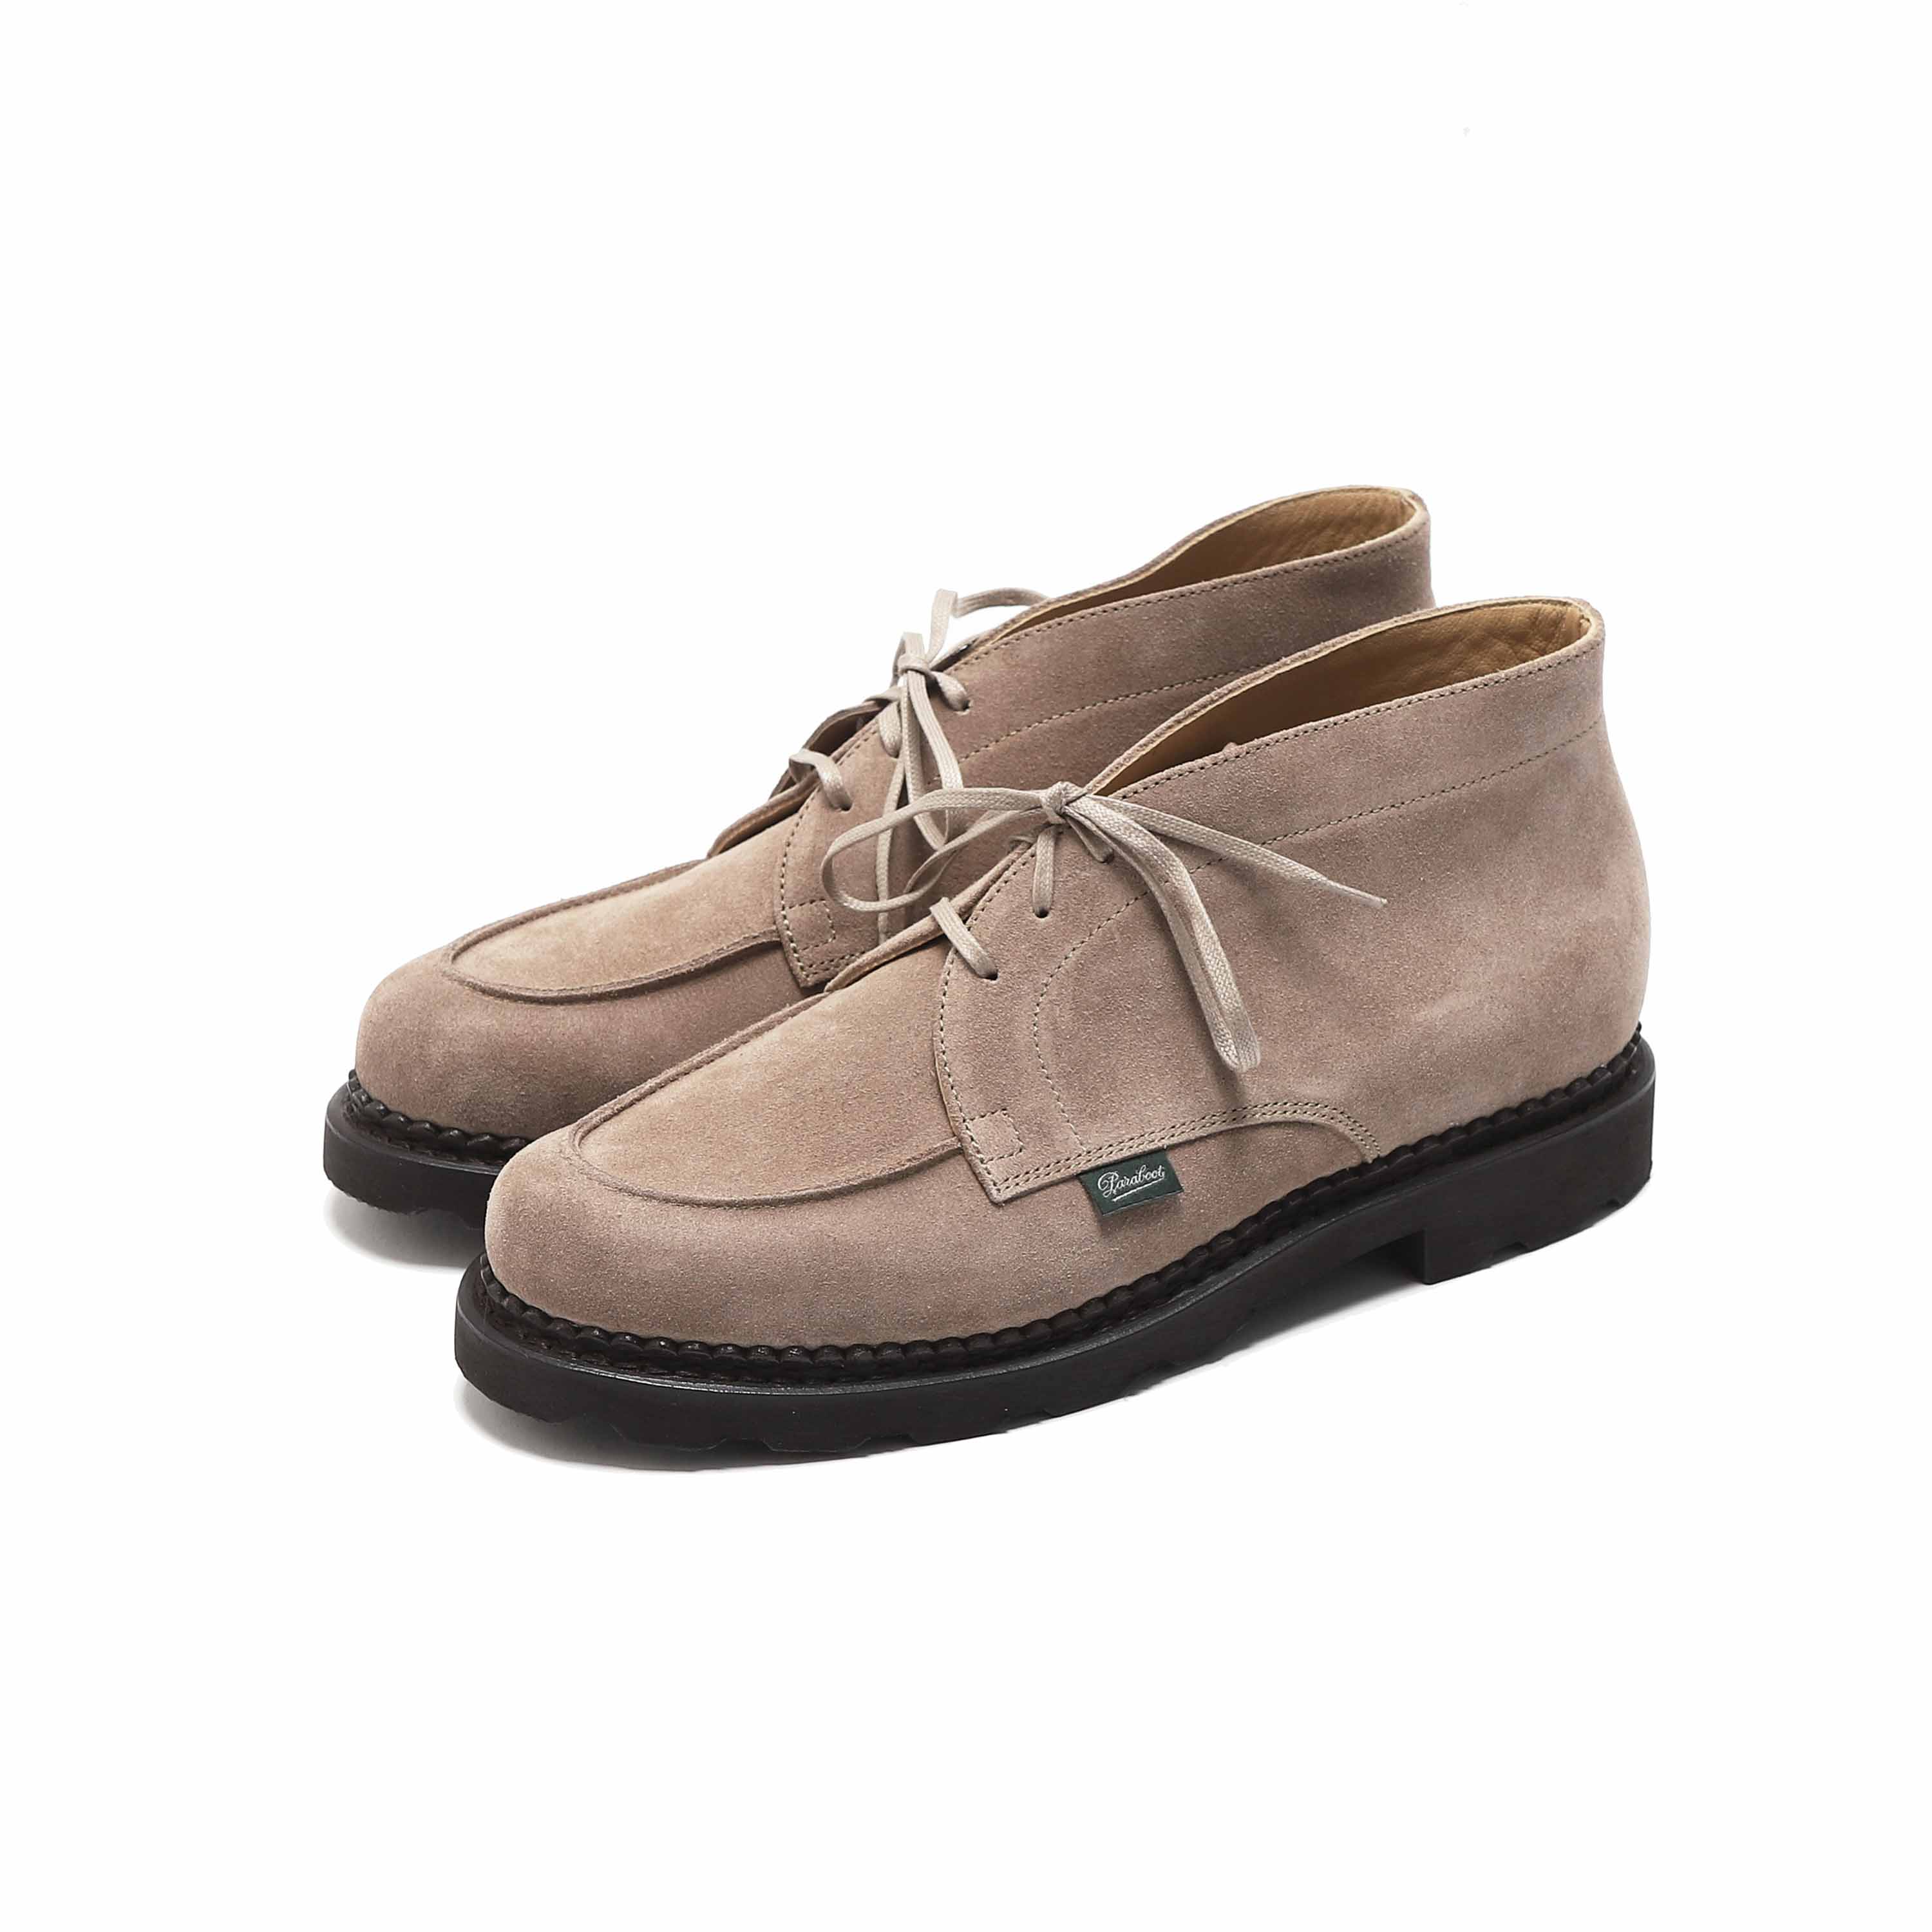 X PARABOOT CHUKKA - SESAME(SUEDE LEATHER)